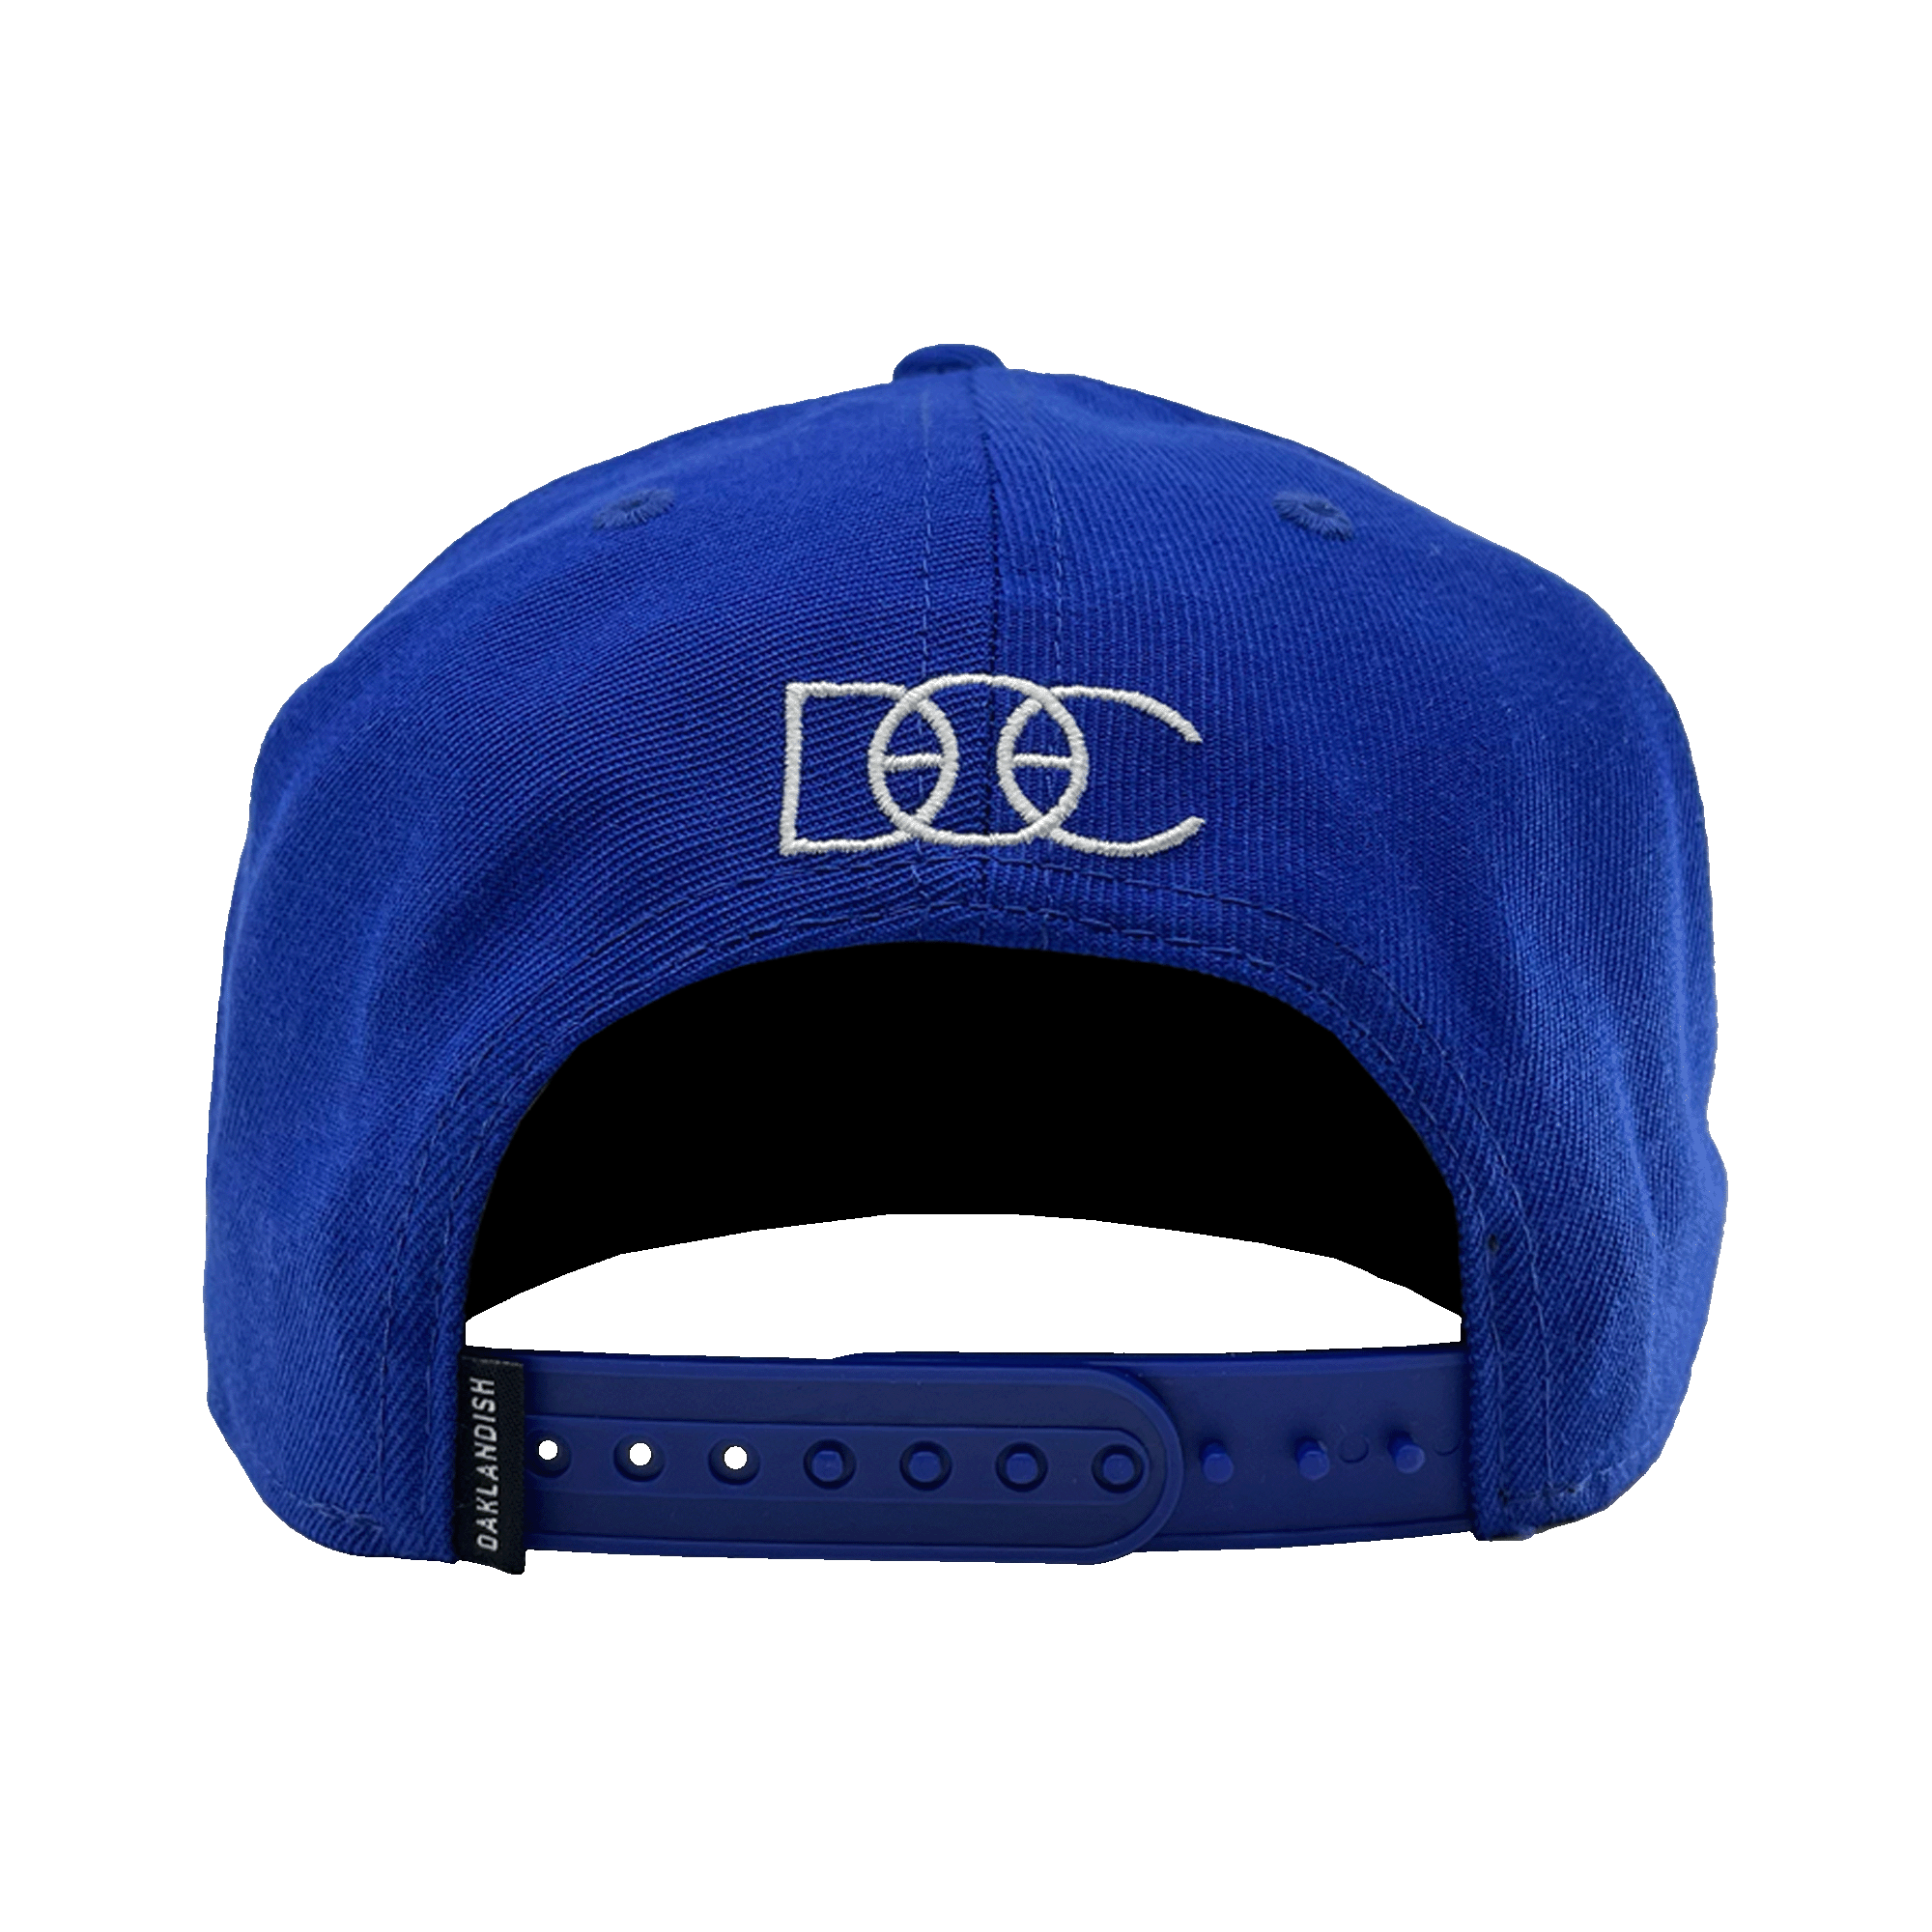 Back side view of a royal blue hat with snapback closure and small OAKLANDISH tag and white embroidered overlapping DOC wordmark.